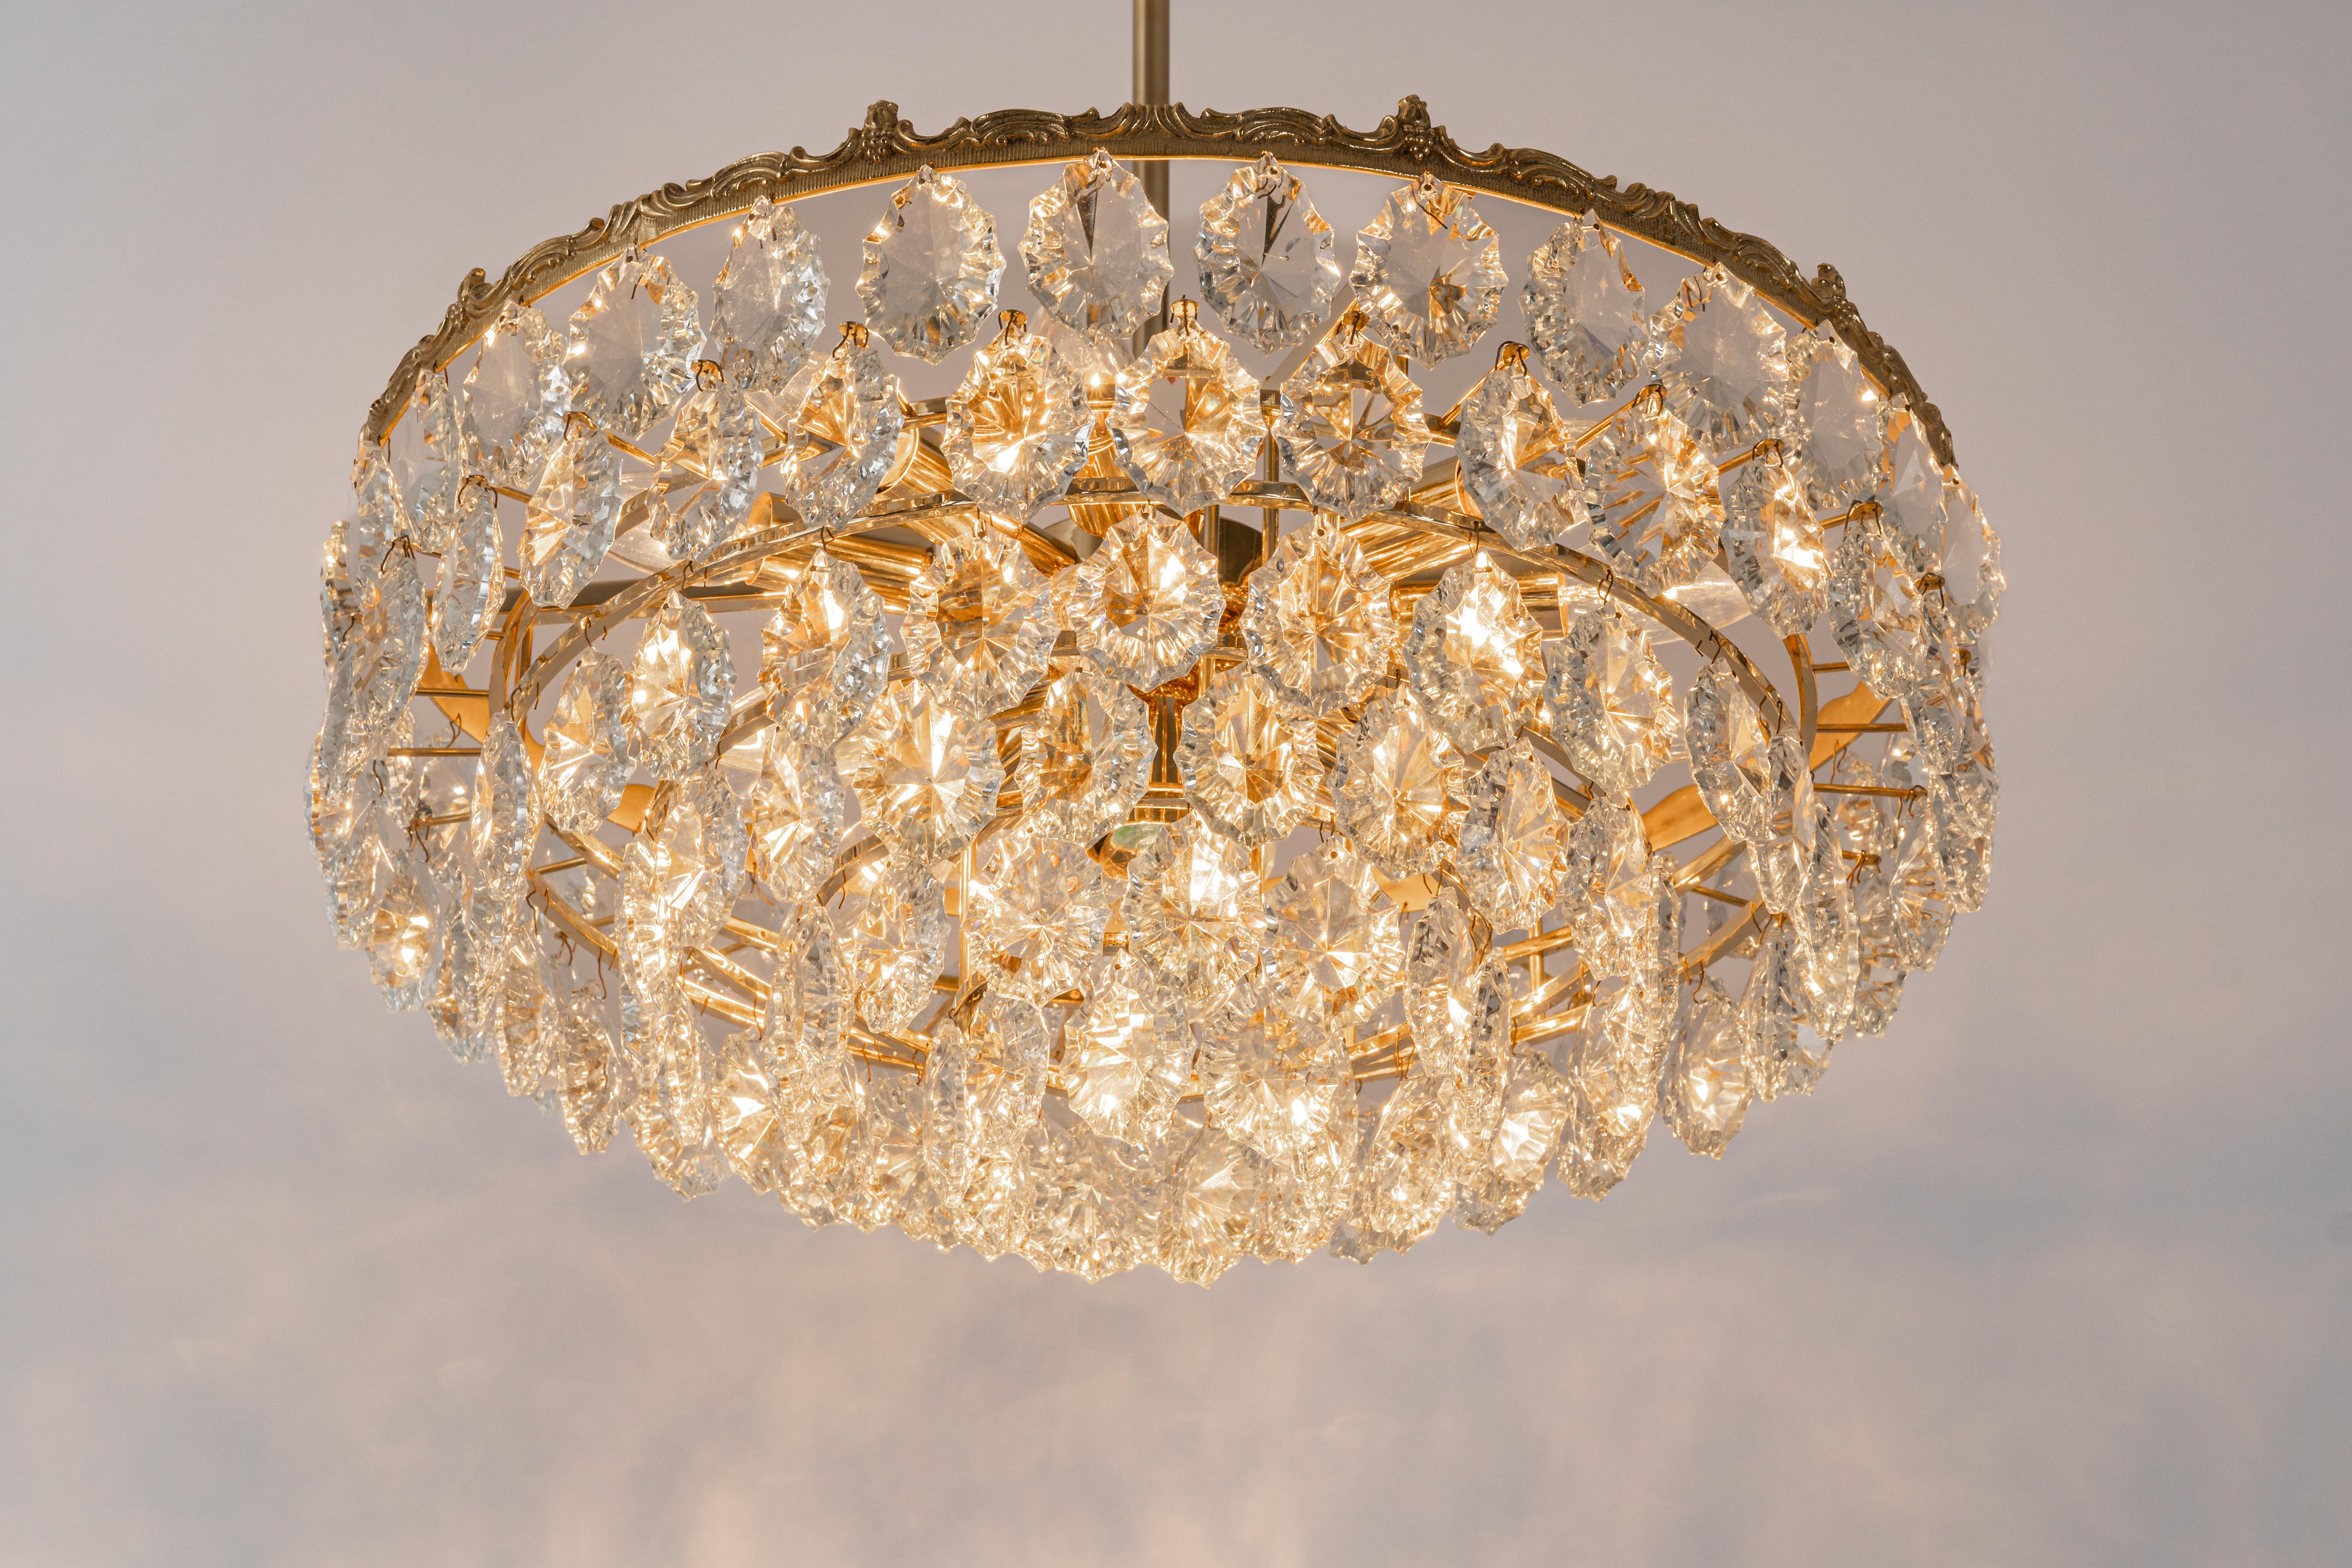 Large Bakalowits Chandelier, Brass and Crystal Glass, Austria, 1960s For Sale 4